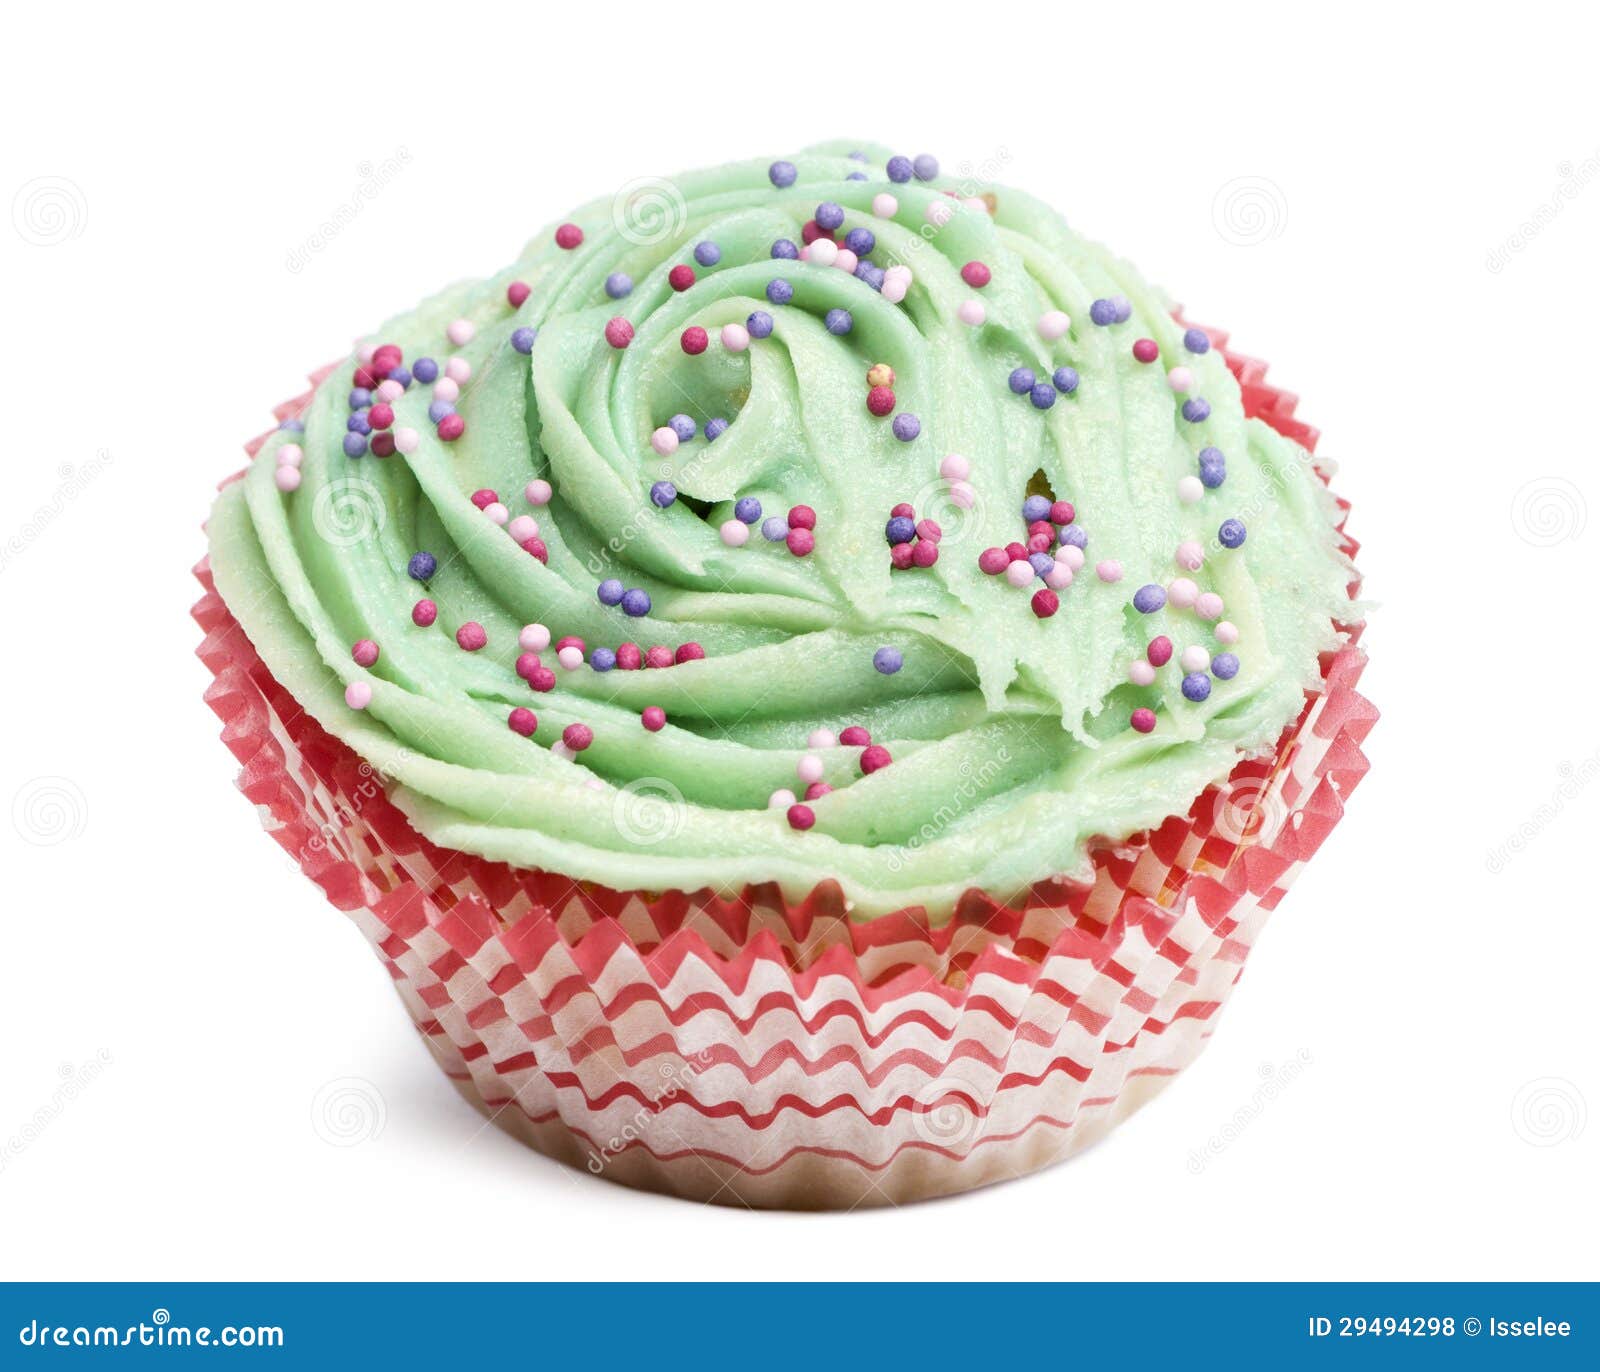 cupcake with green icing and hundreds and thousands against white background